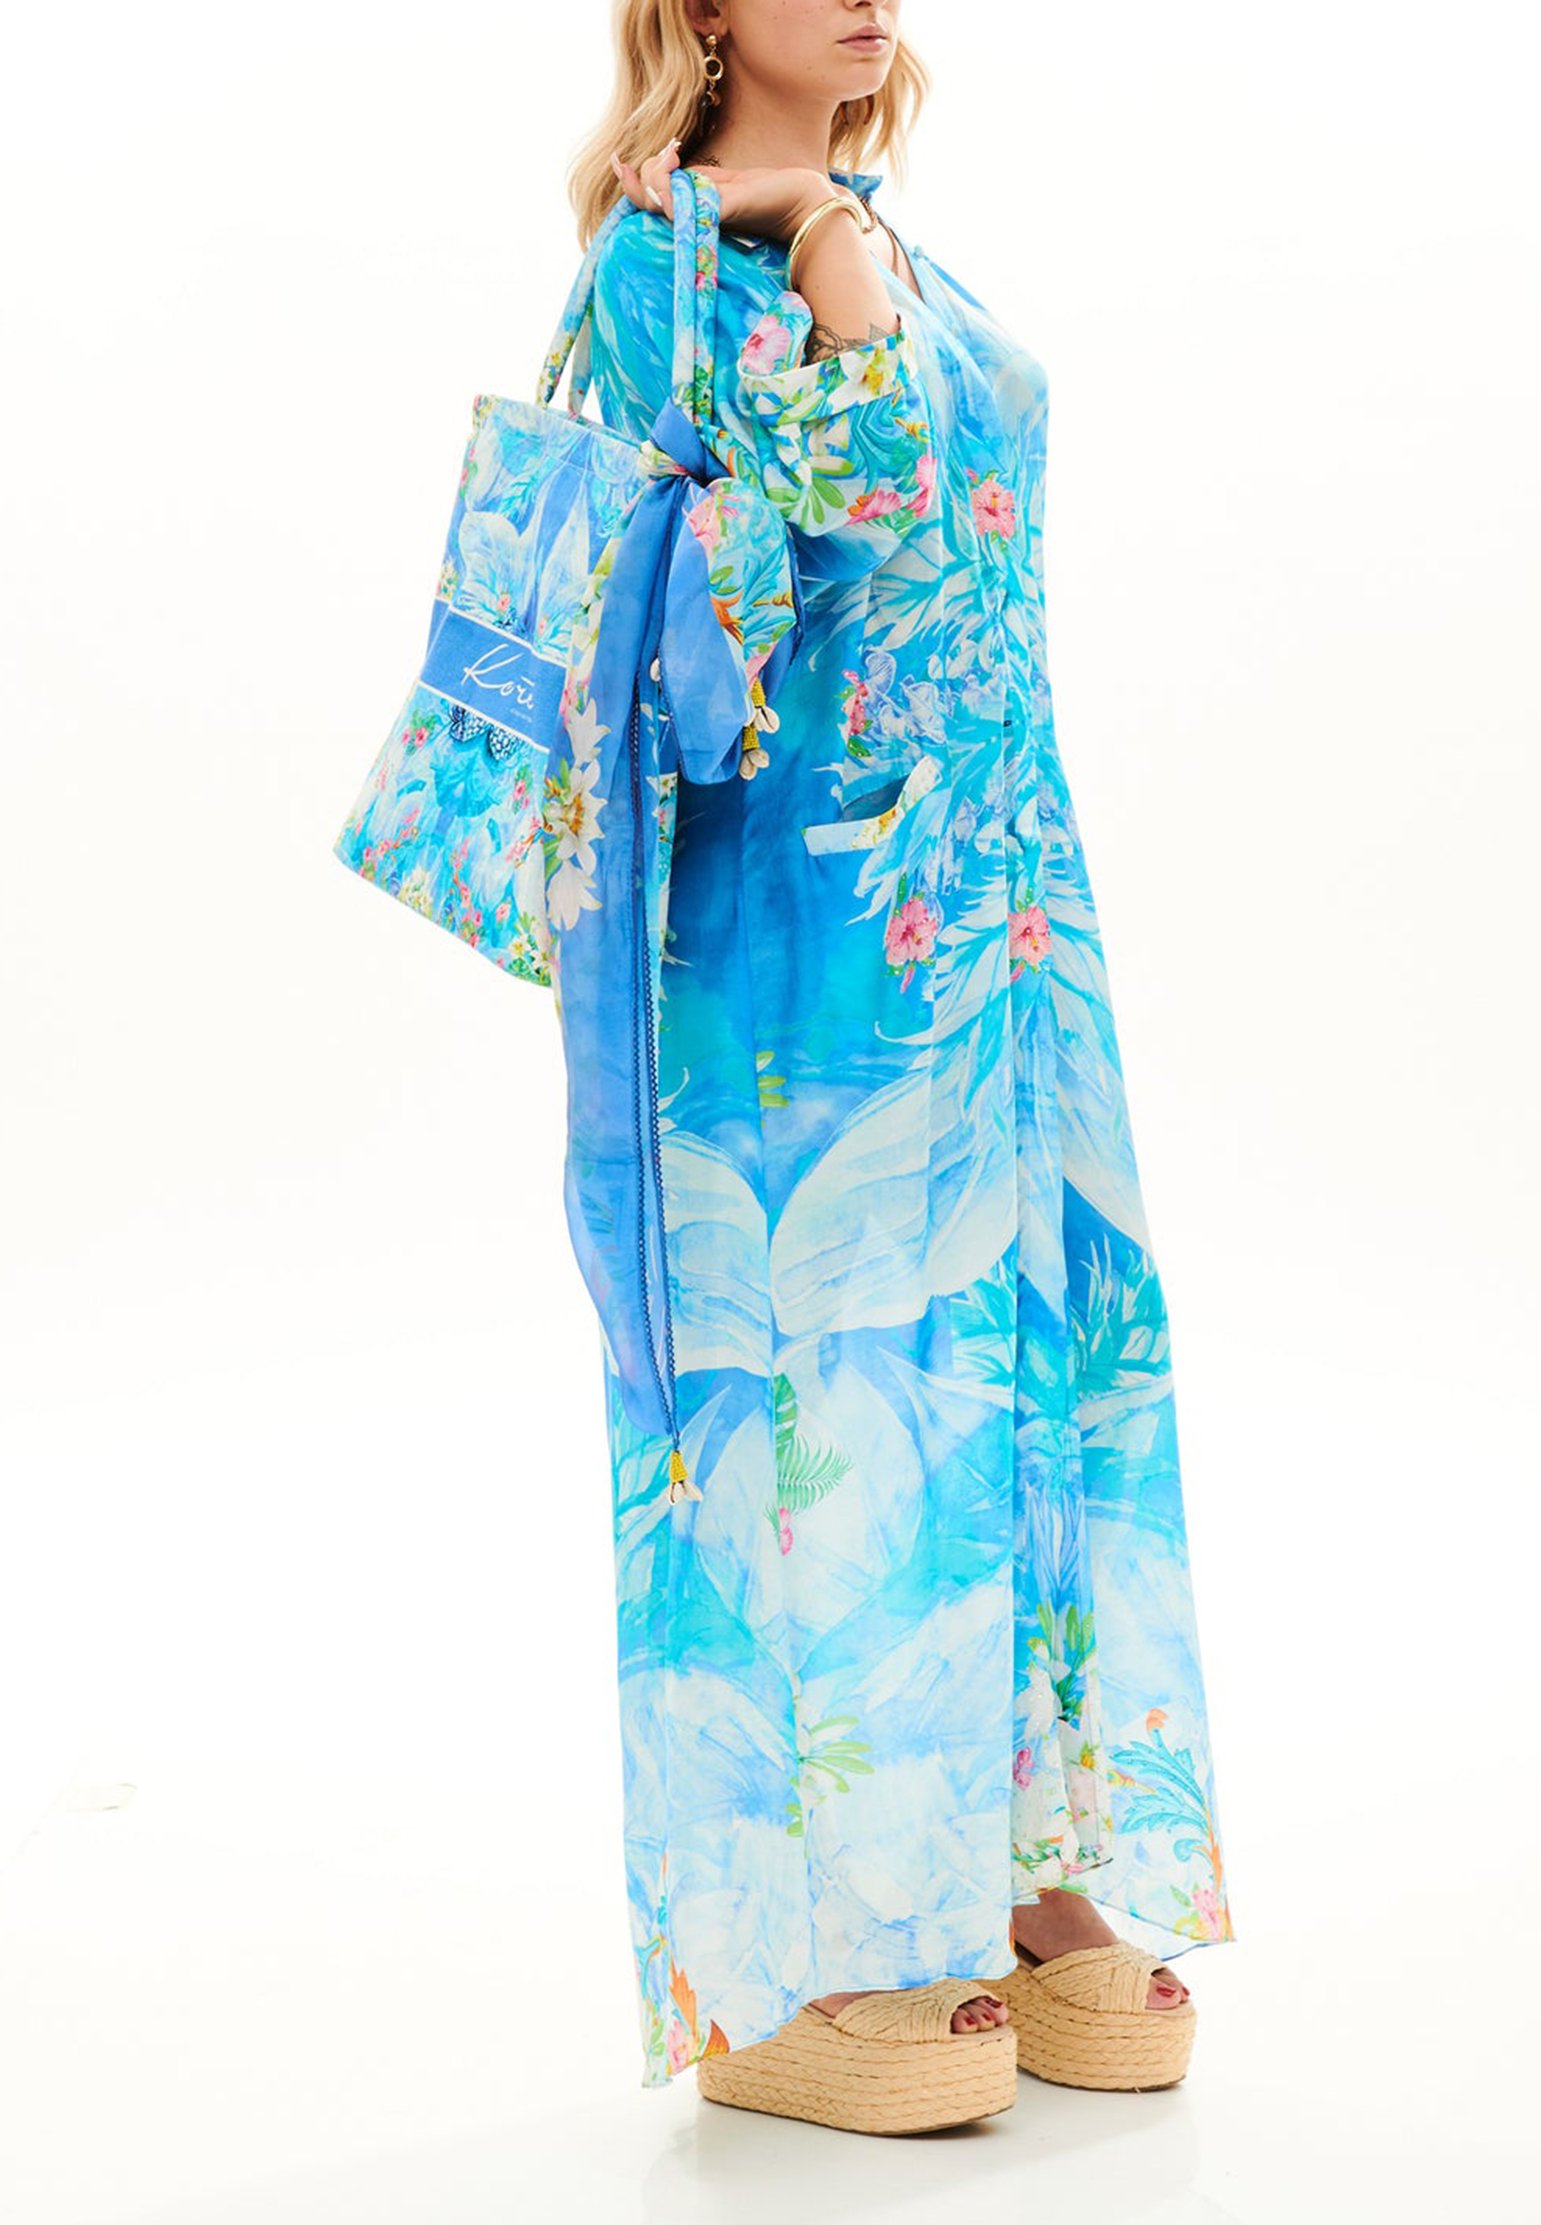 Dress KORE' COLLECTIONS Color: blue (Code: 2309) in online store Allure